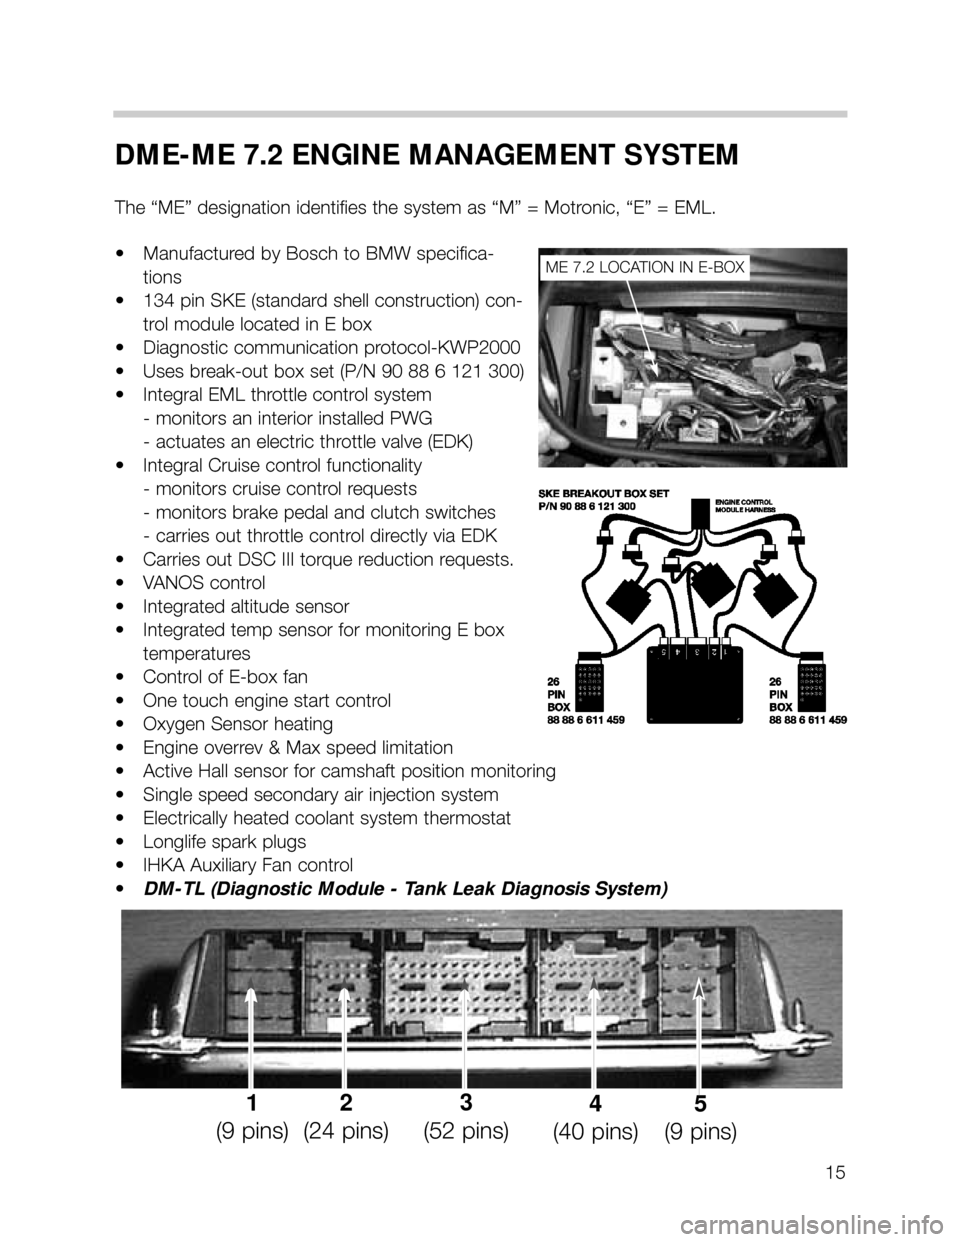 BMW X5 1999 E53 M62TU Engine Workshop Manual 15
DME-ME 7.2 ENGINE MANAGEMENT SYSTEM
The “ME” designation identifies the system as “M” = Motronic, “E” = EML.
• Manufactured by Bosch to BMW specifica-
tions
• 134 pin SKE (standard 